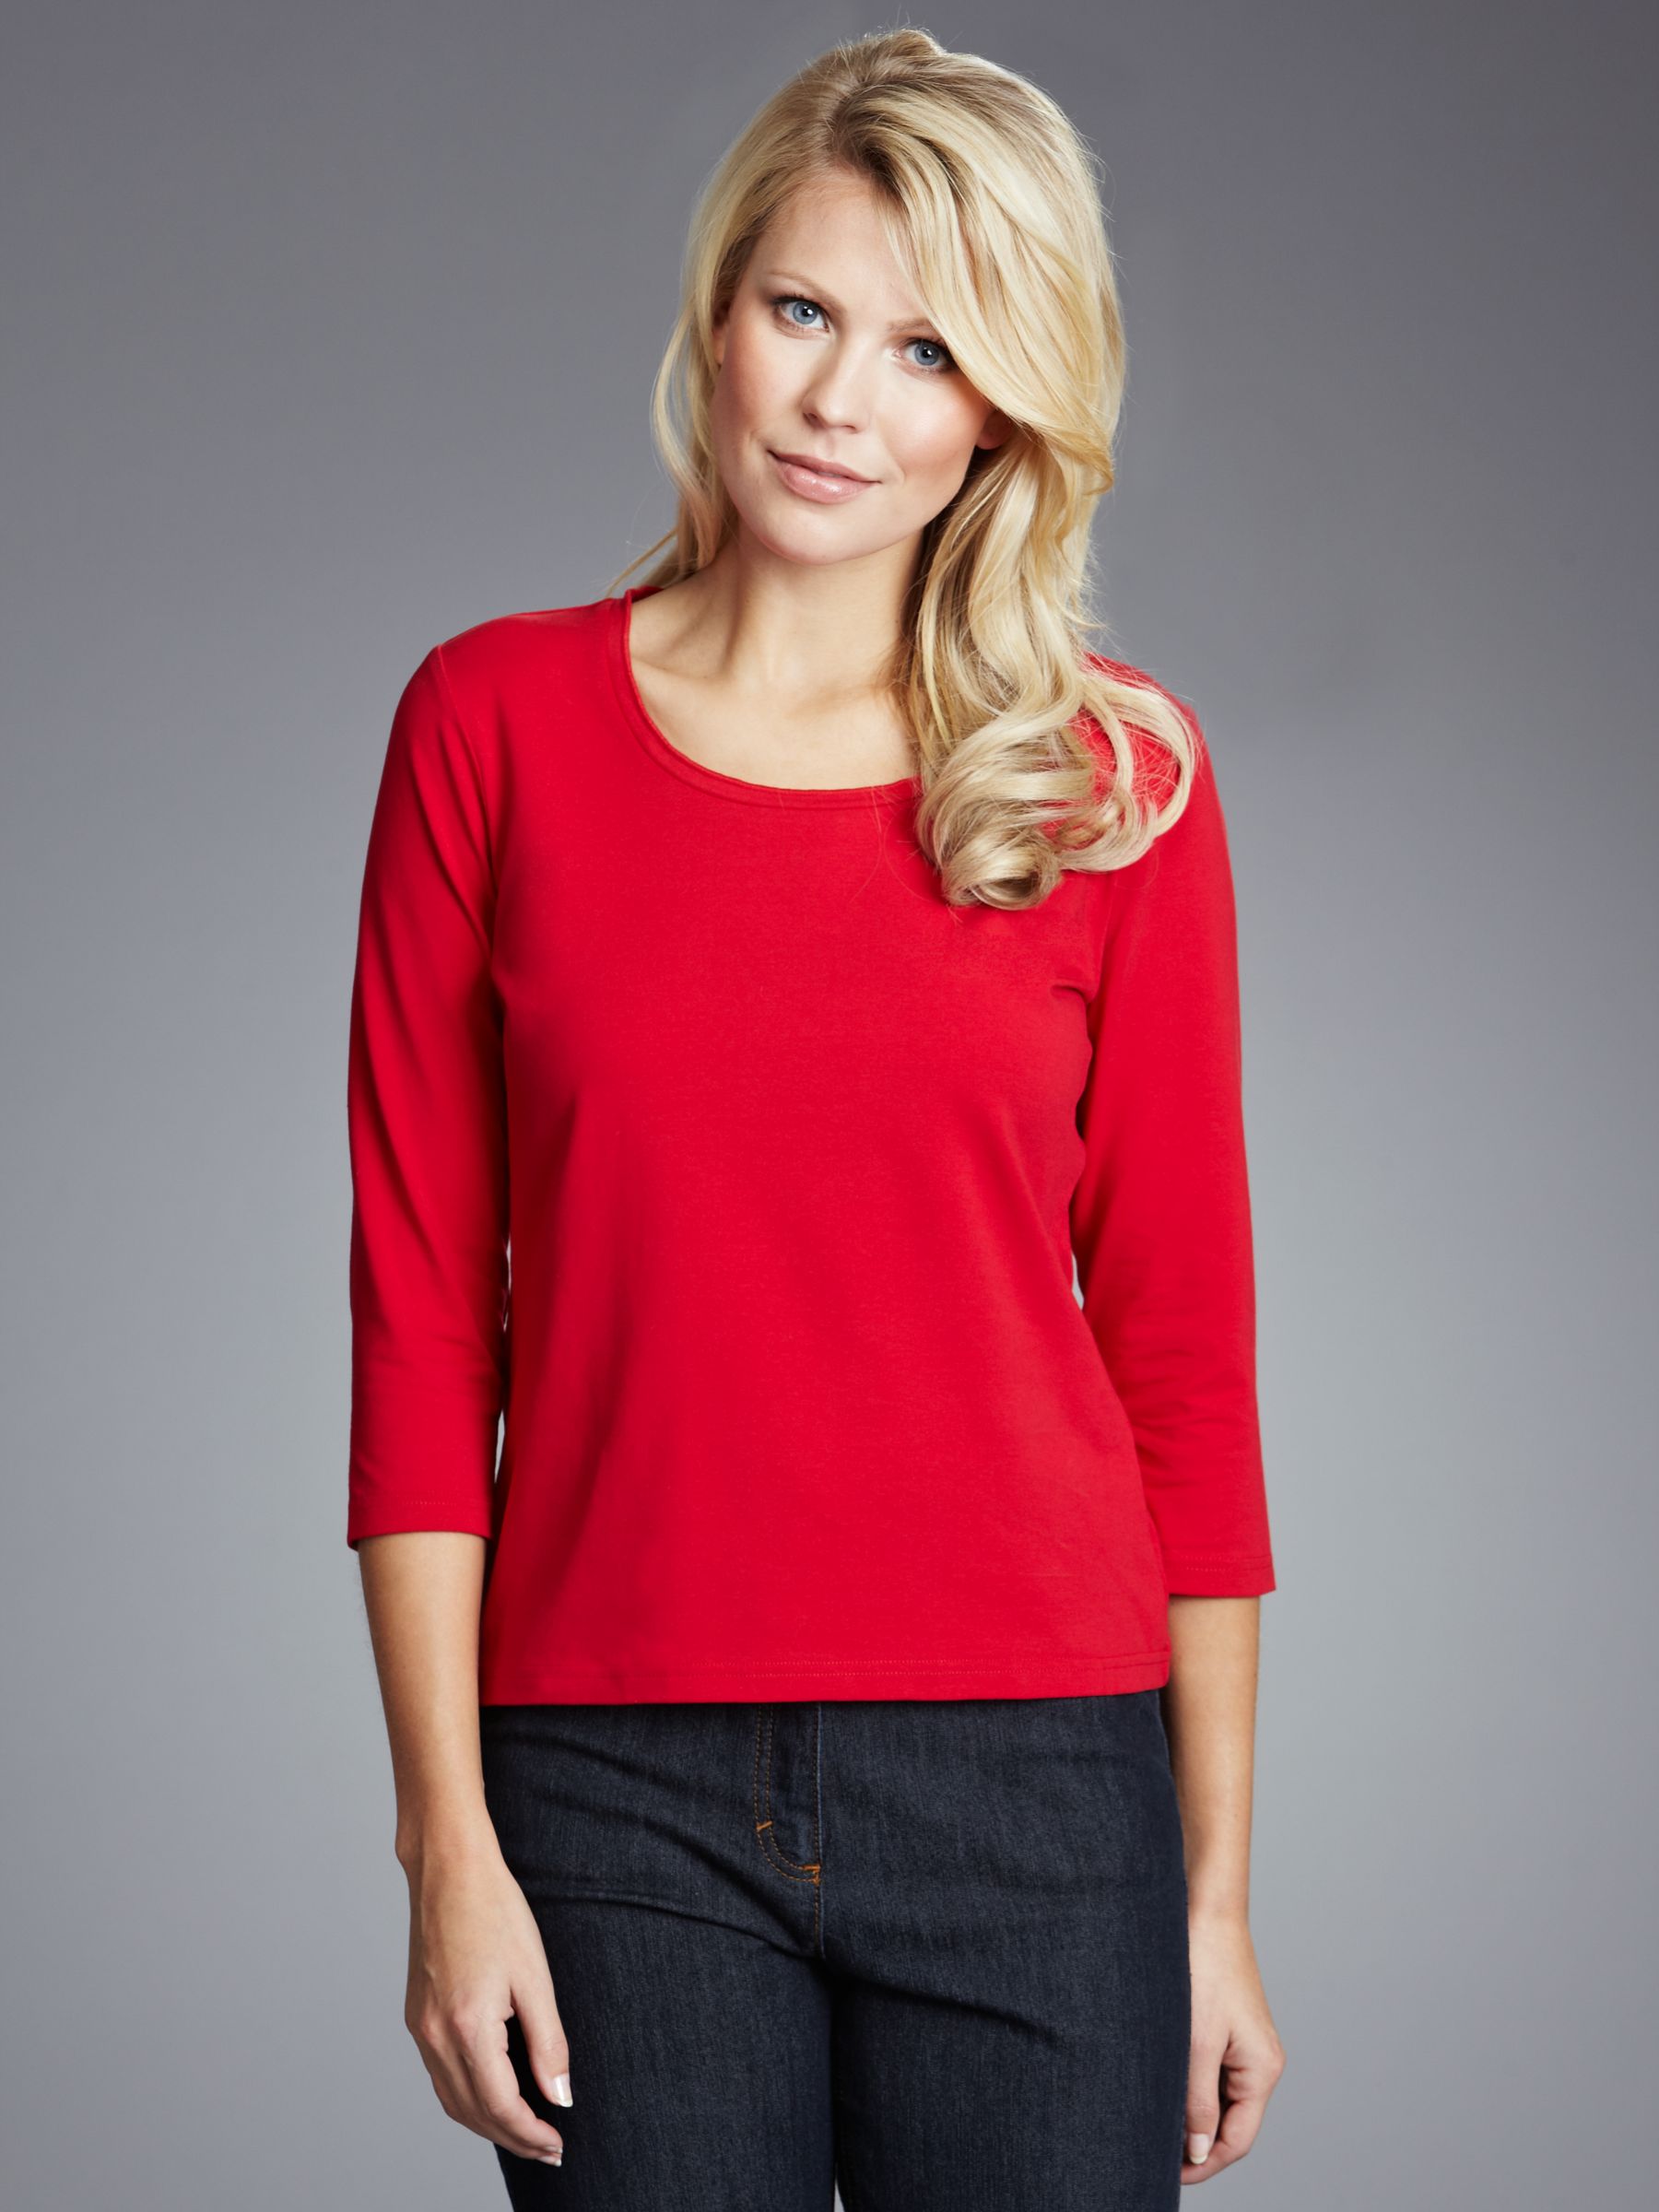 Betty Barclay 3/4 Sleeve T-shirt, Red